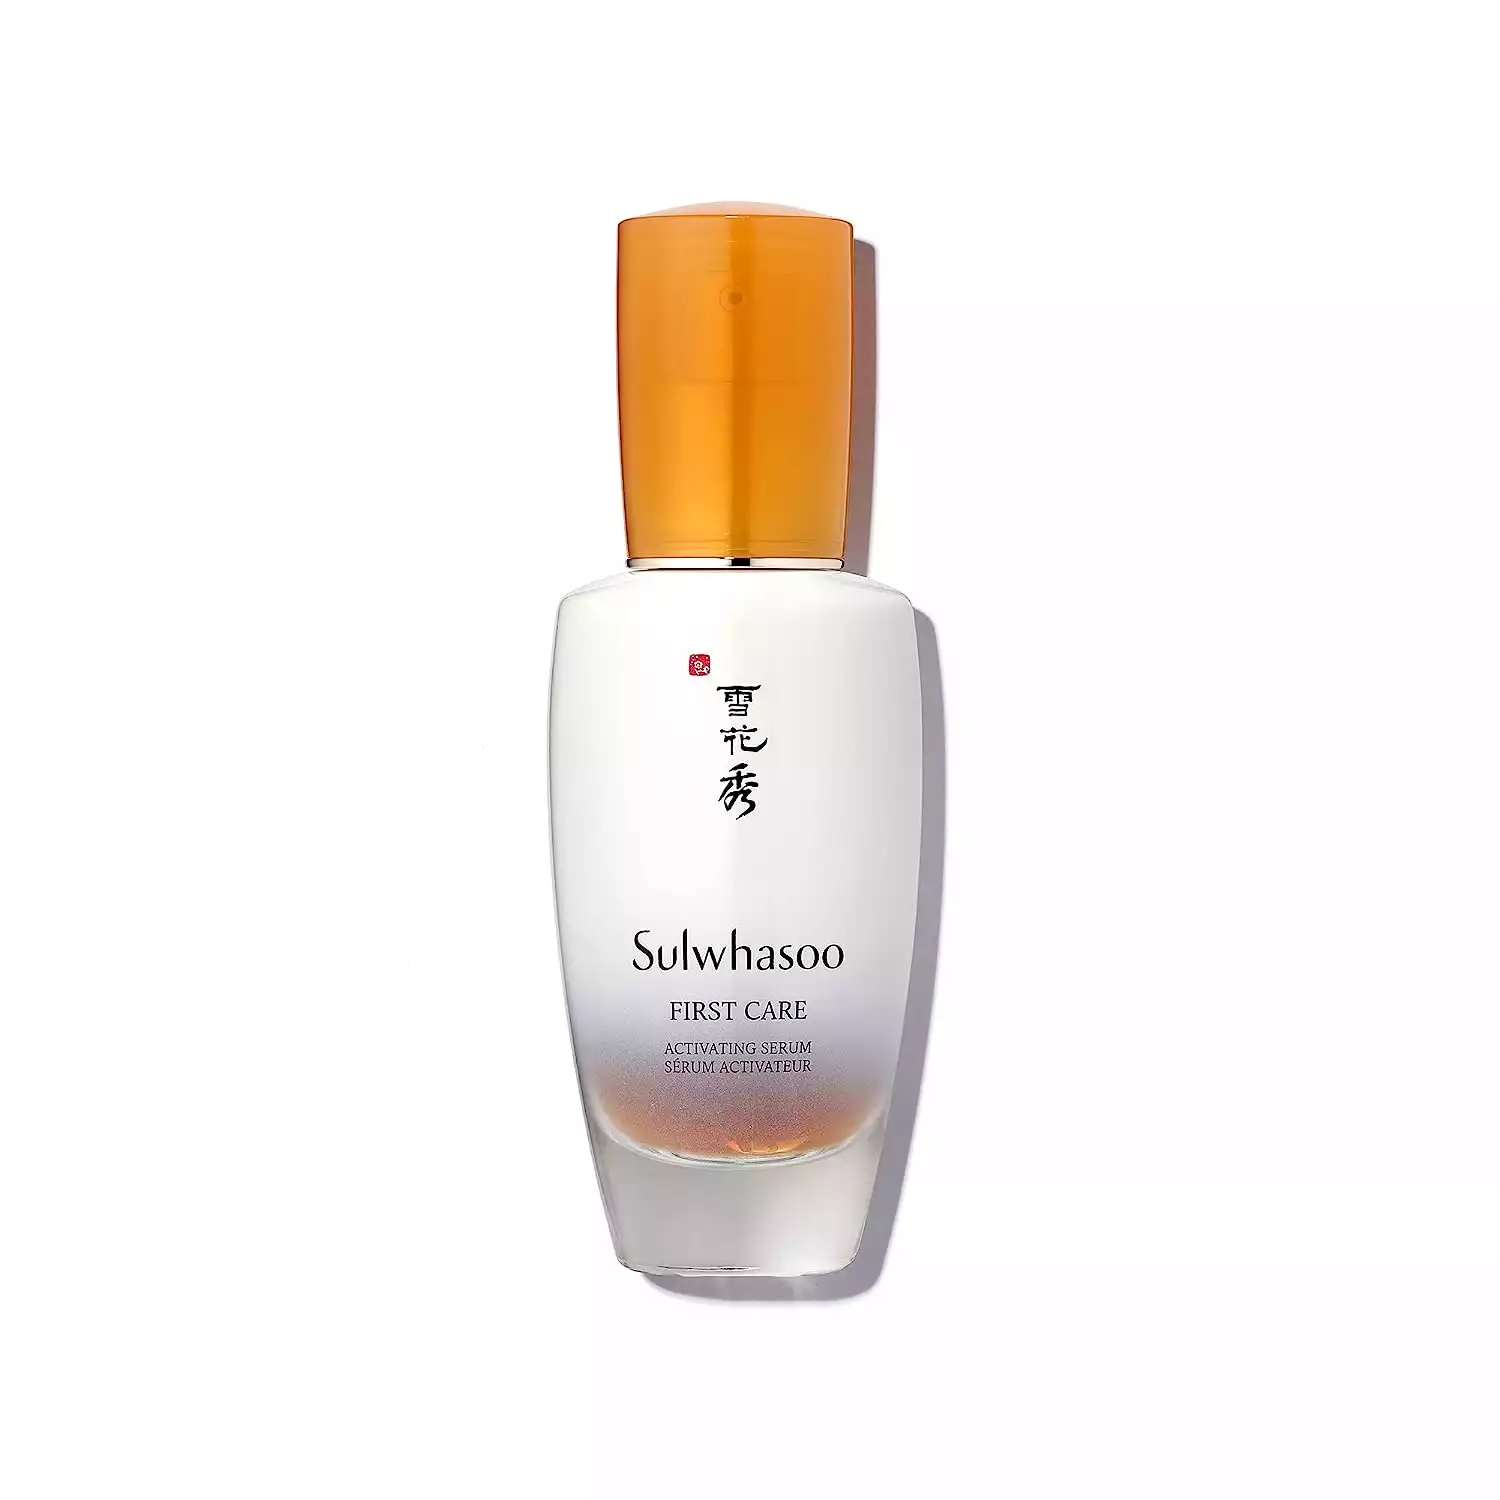 Sulwhasoo Anti-Aging First Care Activating Serum